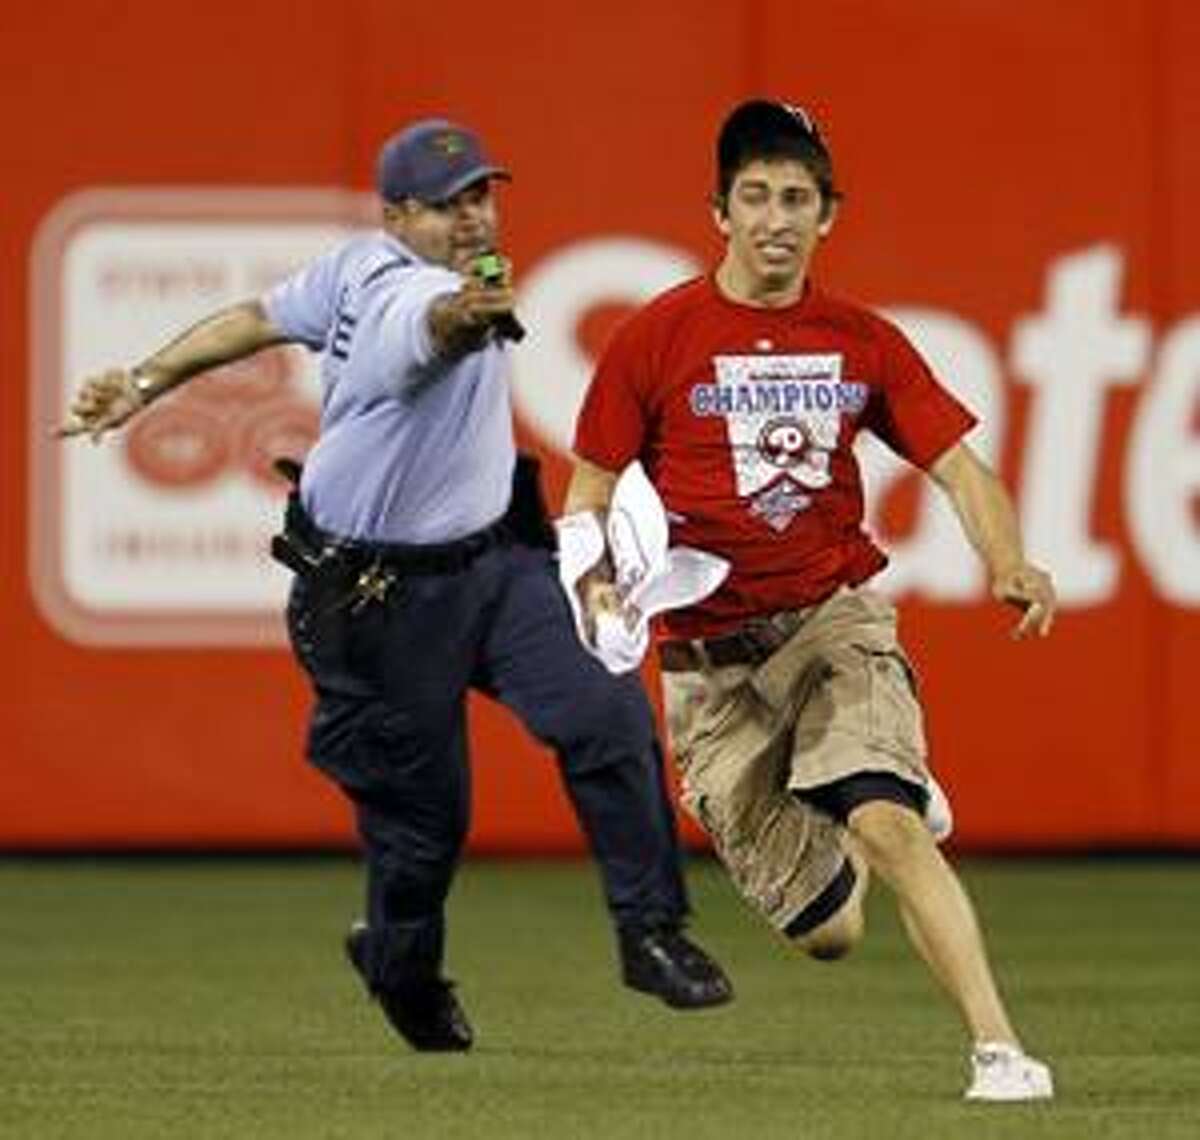 In this photo taken on May 3, 2010, a law enforcement officer chases down Steve Consalvi after he ran onto the field before the eighth inning of a baseball game between the Philadelphia Phillies and the St. Louis Cardinals in Philadelphia. The police officer used a Taser gun to apprehend Consalvi. (AP Photo/Matt Slocum)